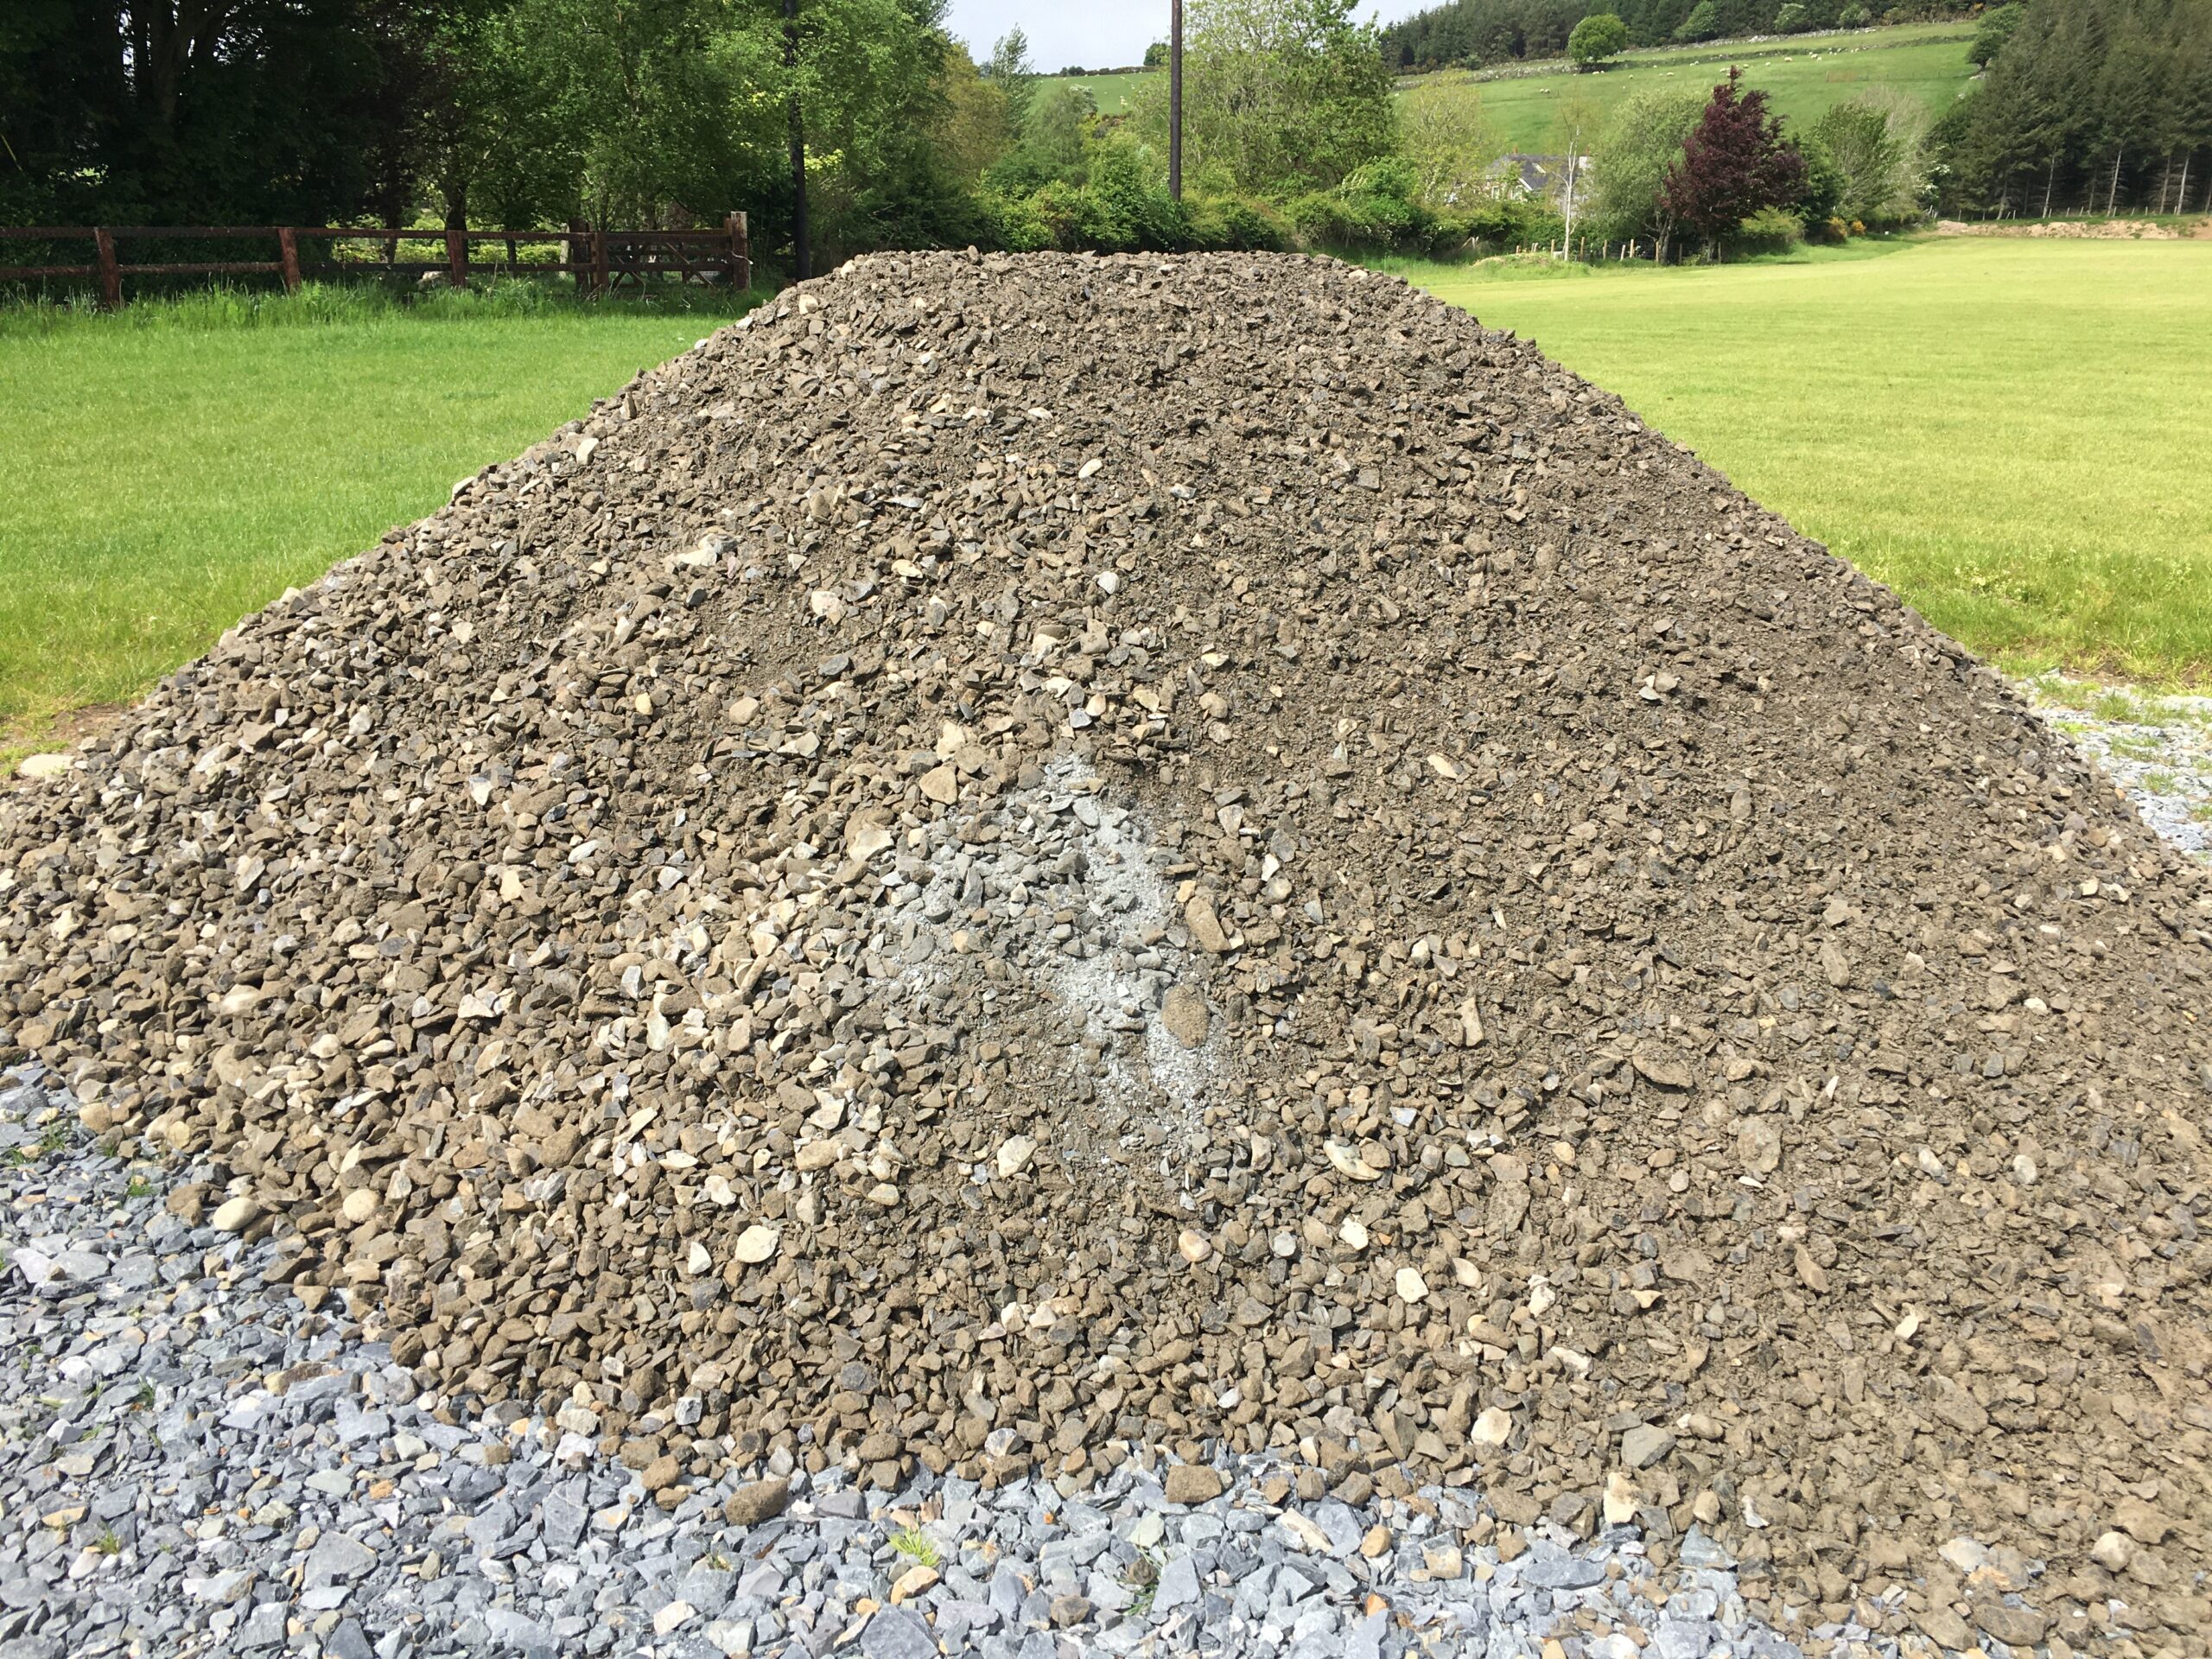 Start of Walking Track Project - HUDSONS deliver T1 Stone to Kilbride GAA Site